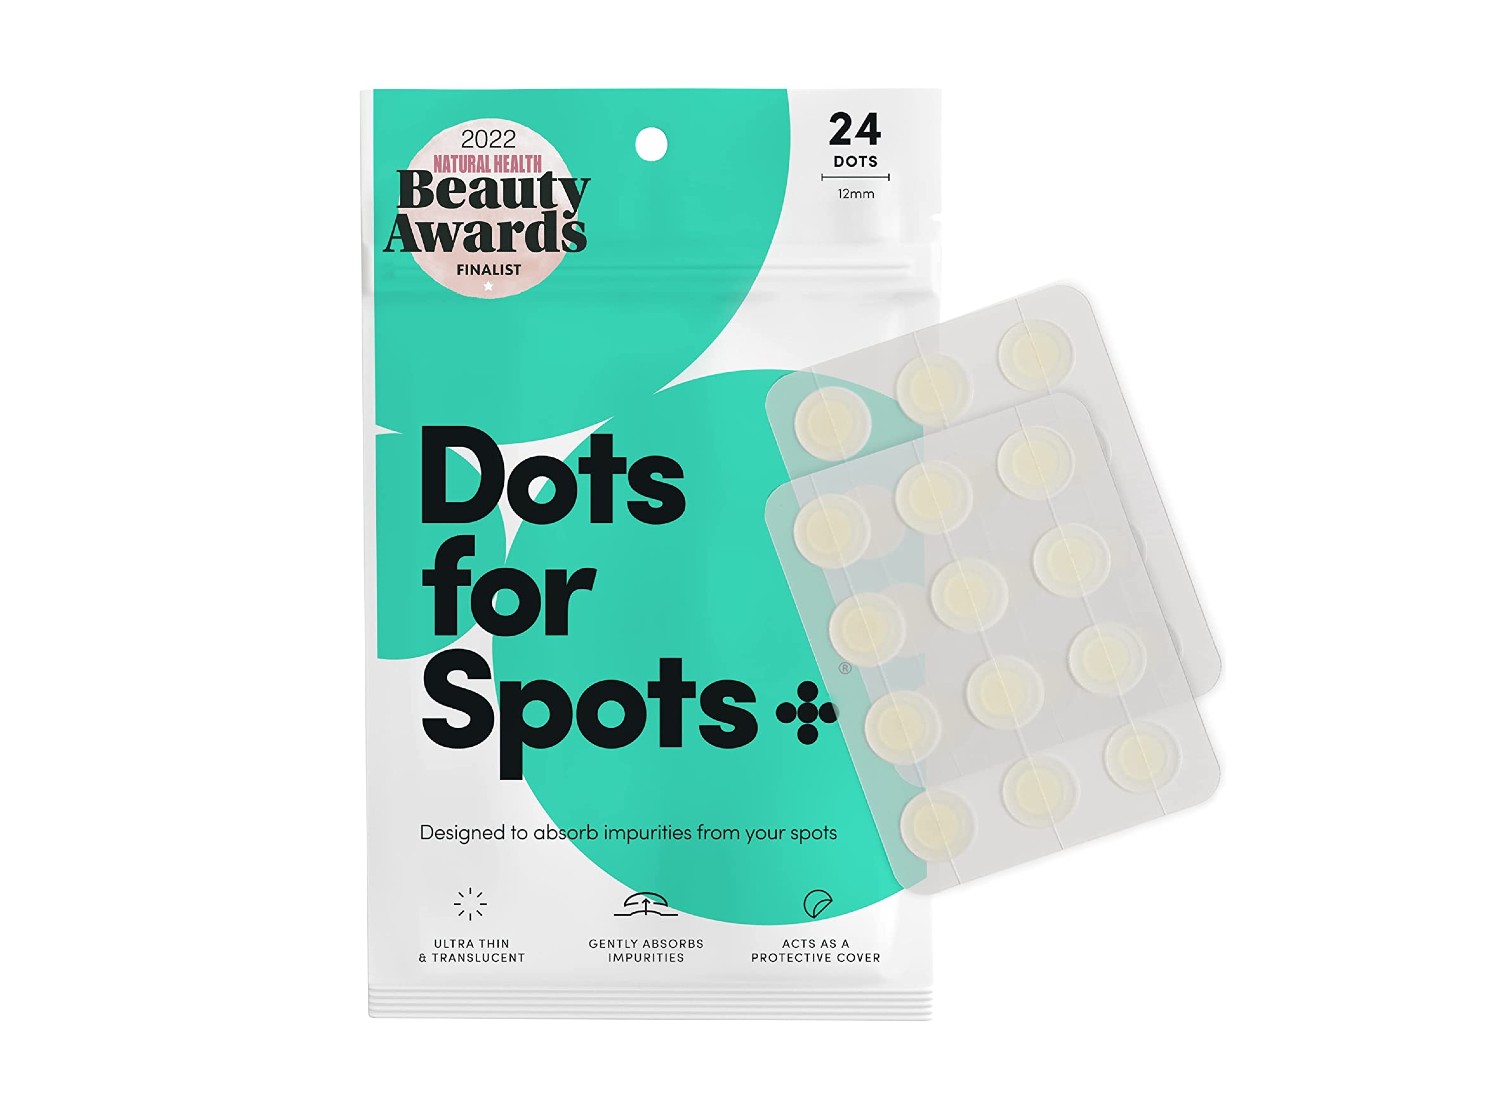 A Dots for Spots pimple patch container on a white background.